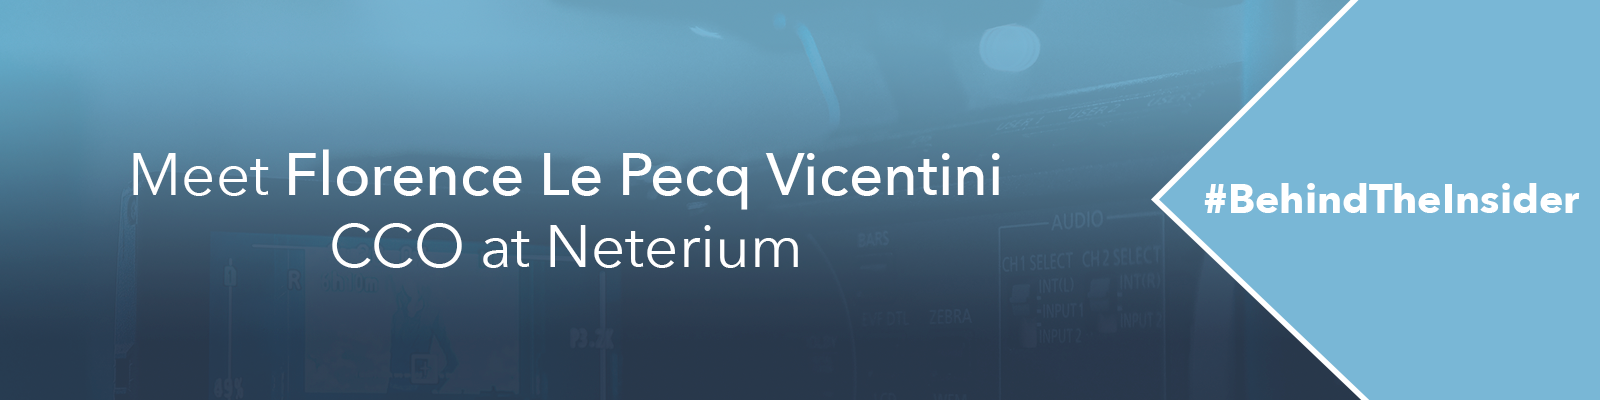 #BehindTheInsider - Meet Florence Le Pecq Vicentini, CCO of Neterium